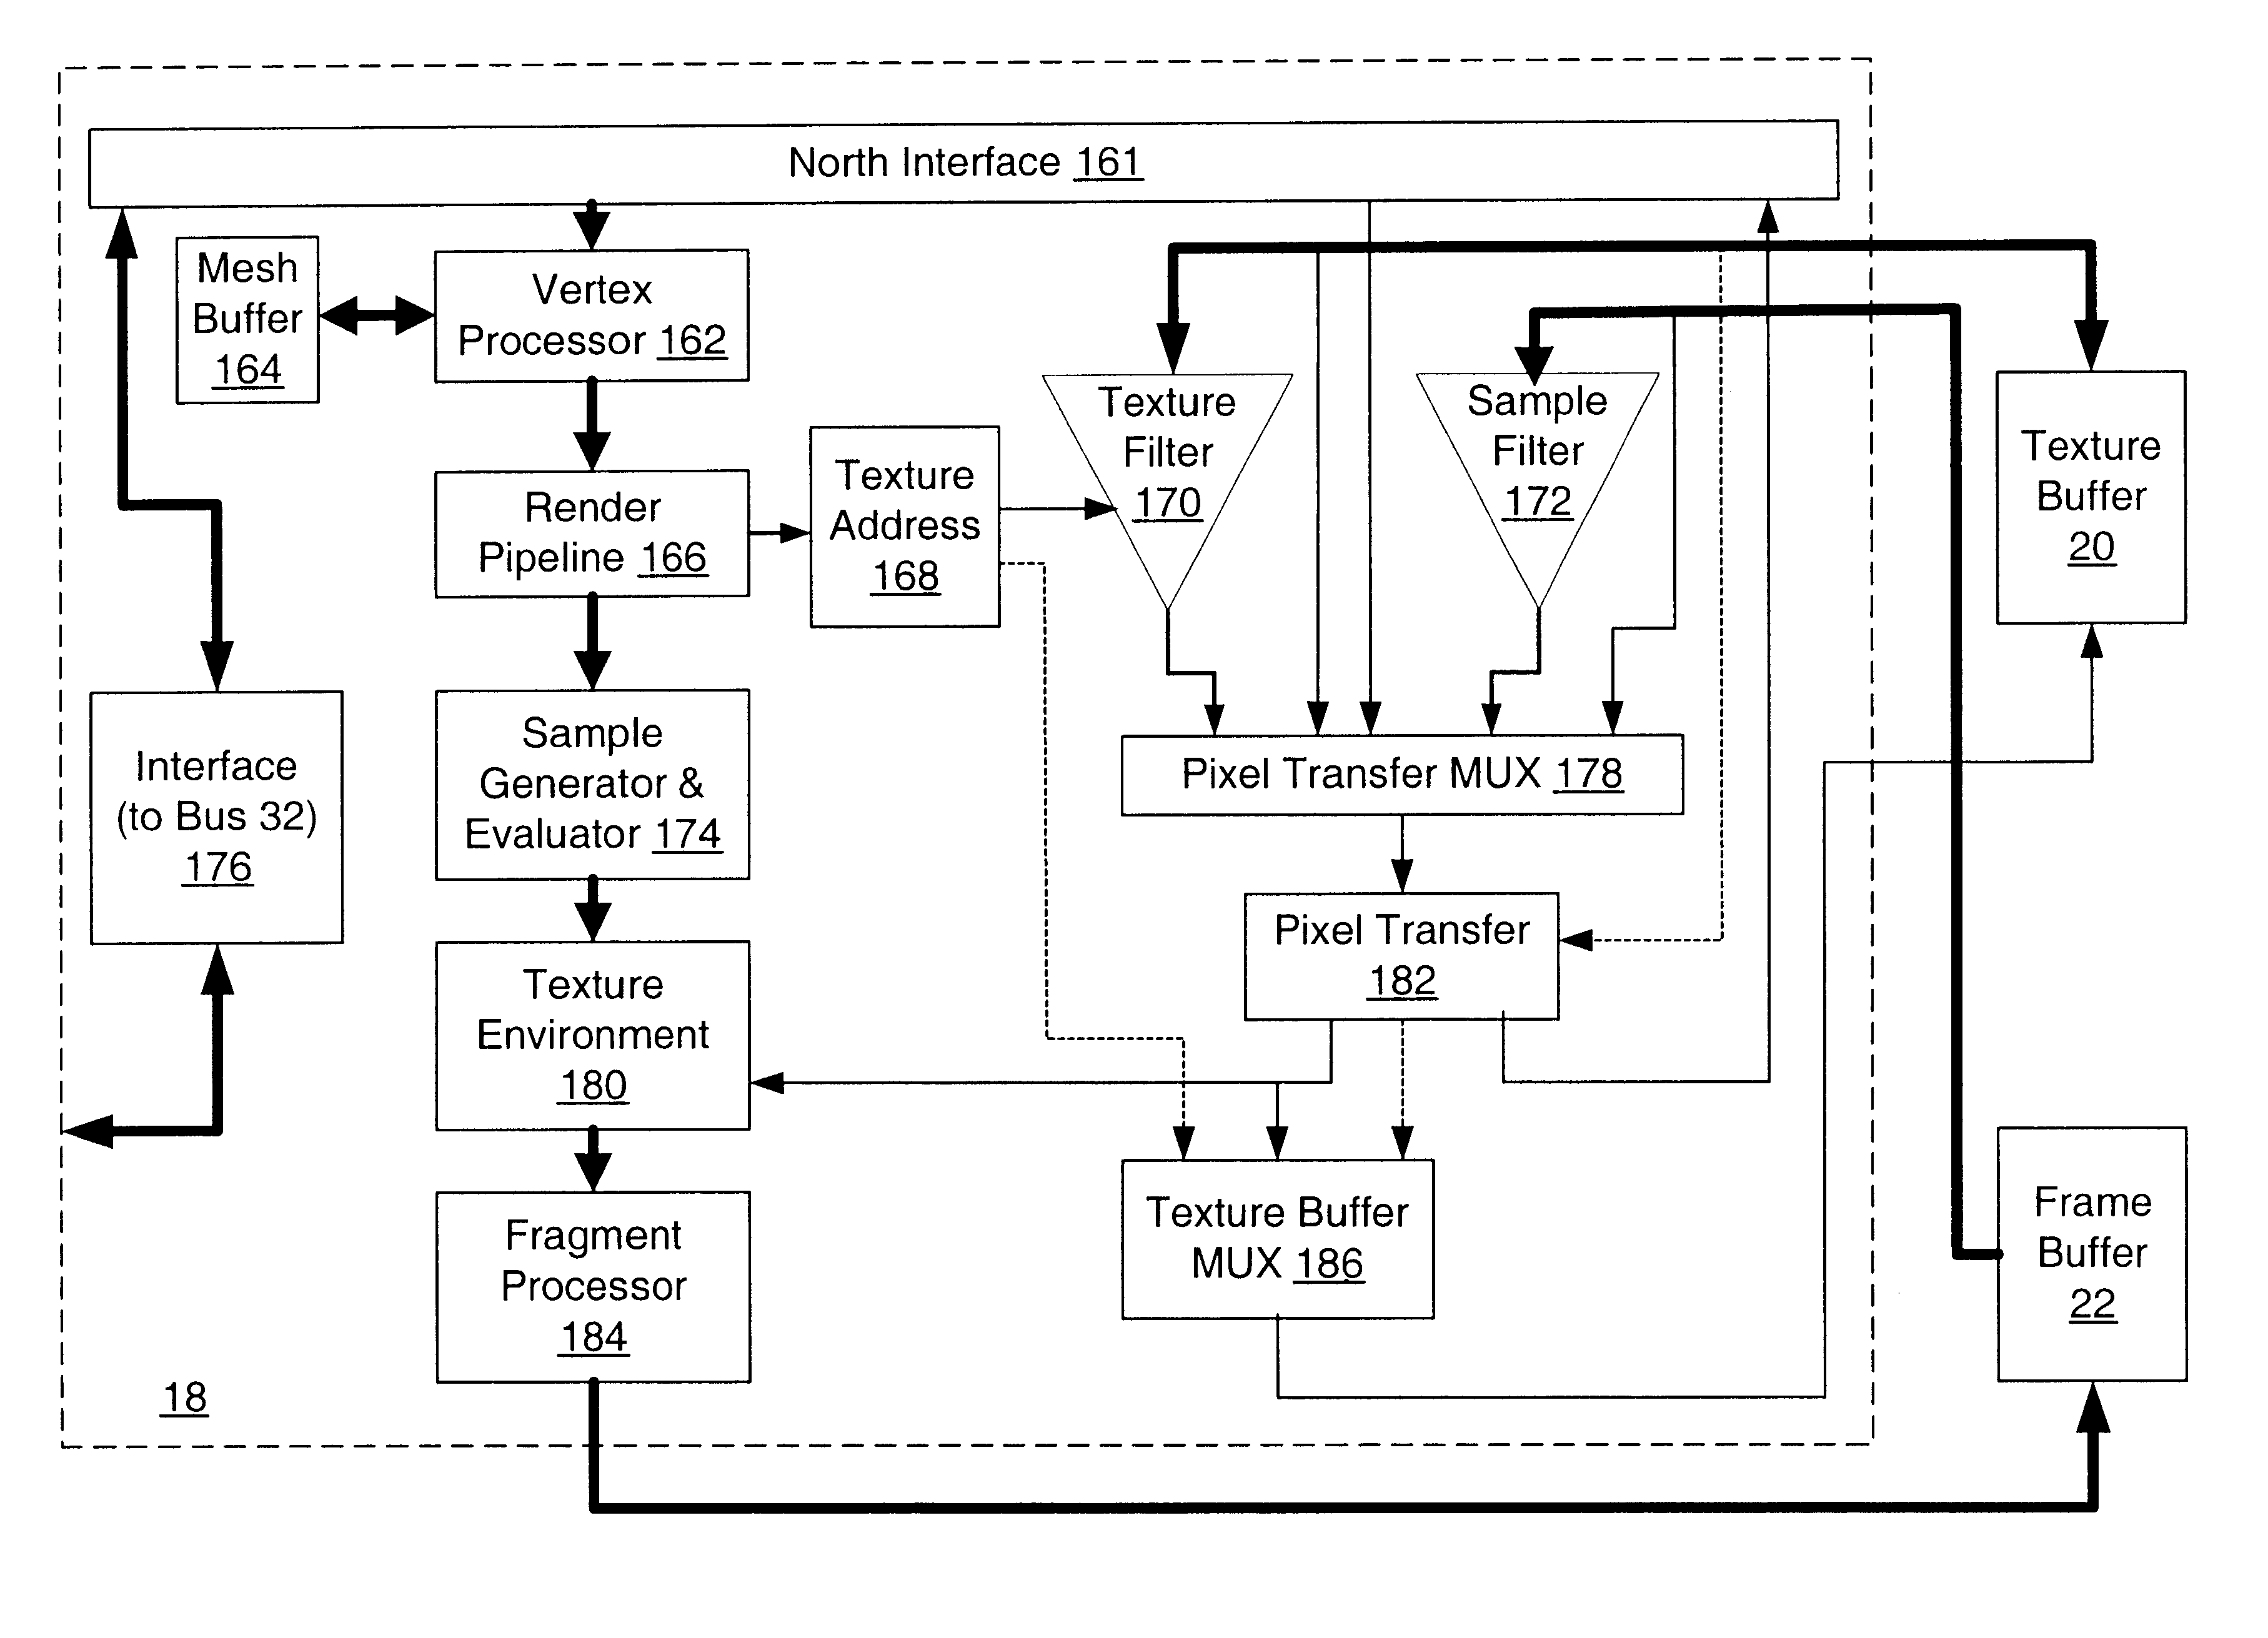 Sample cache for supersample filtering